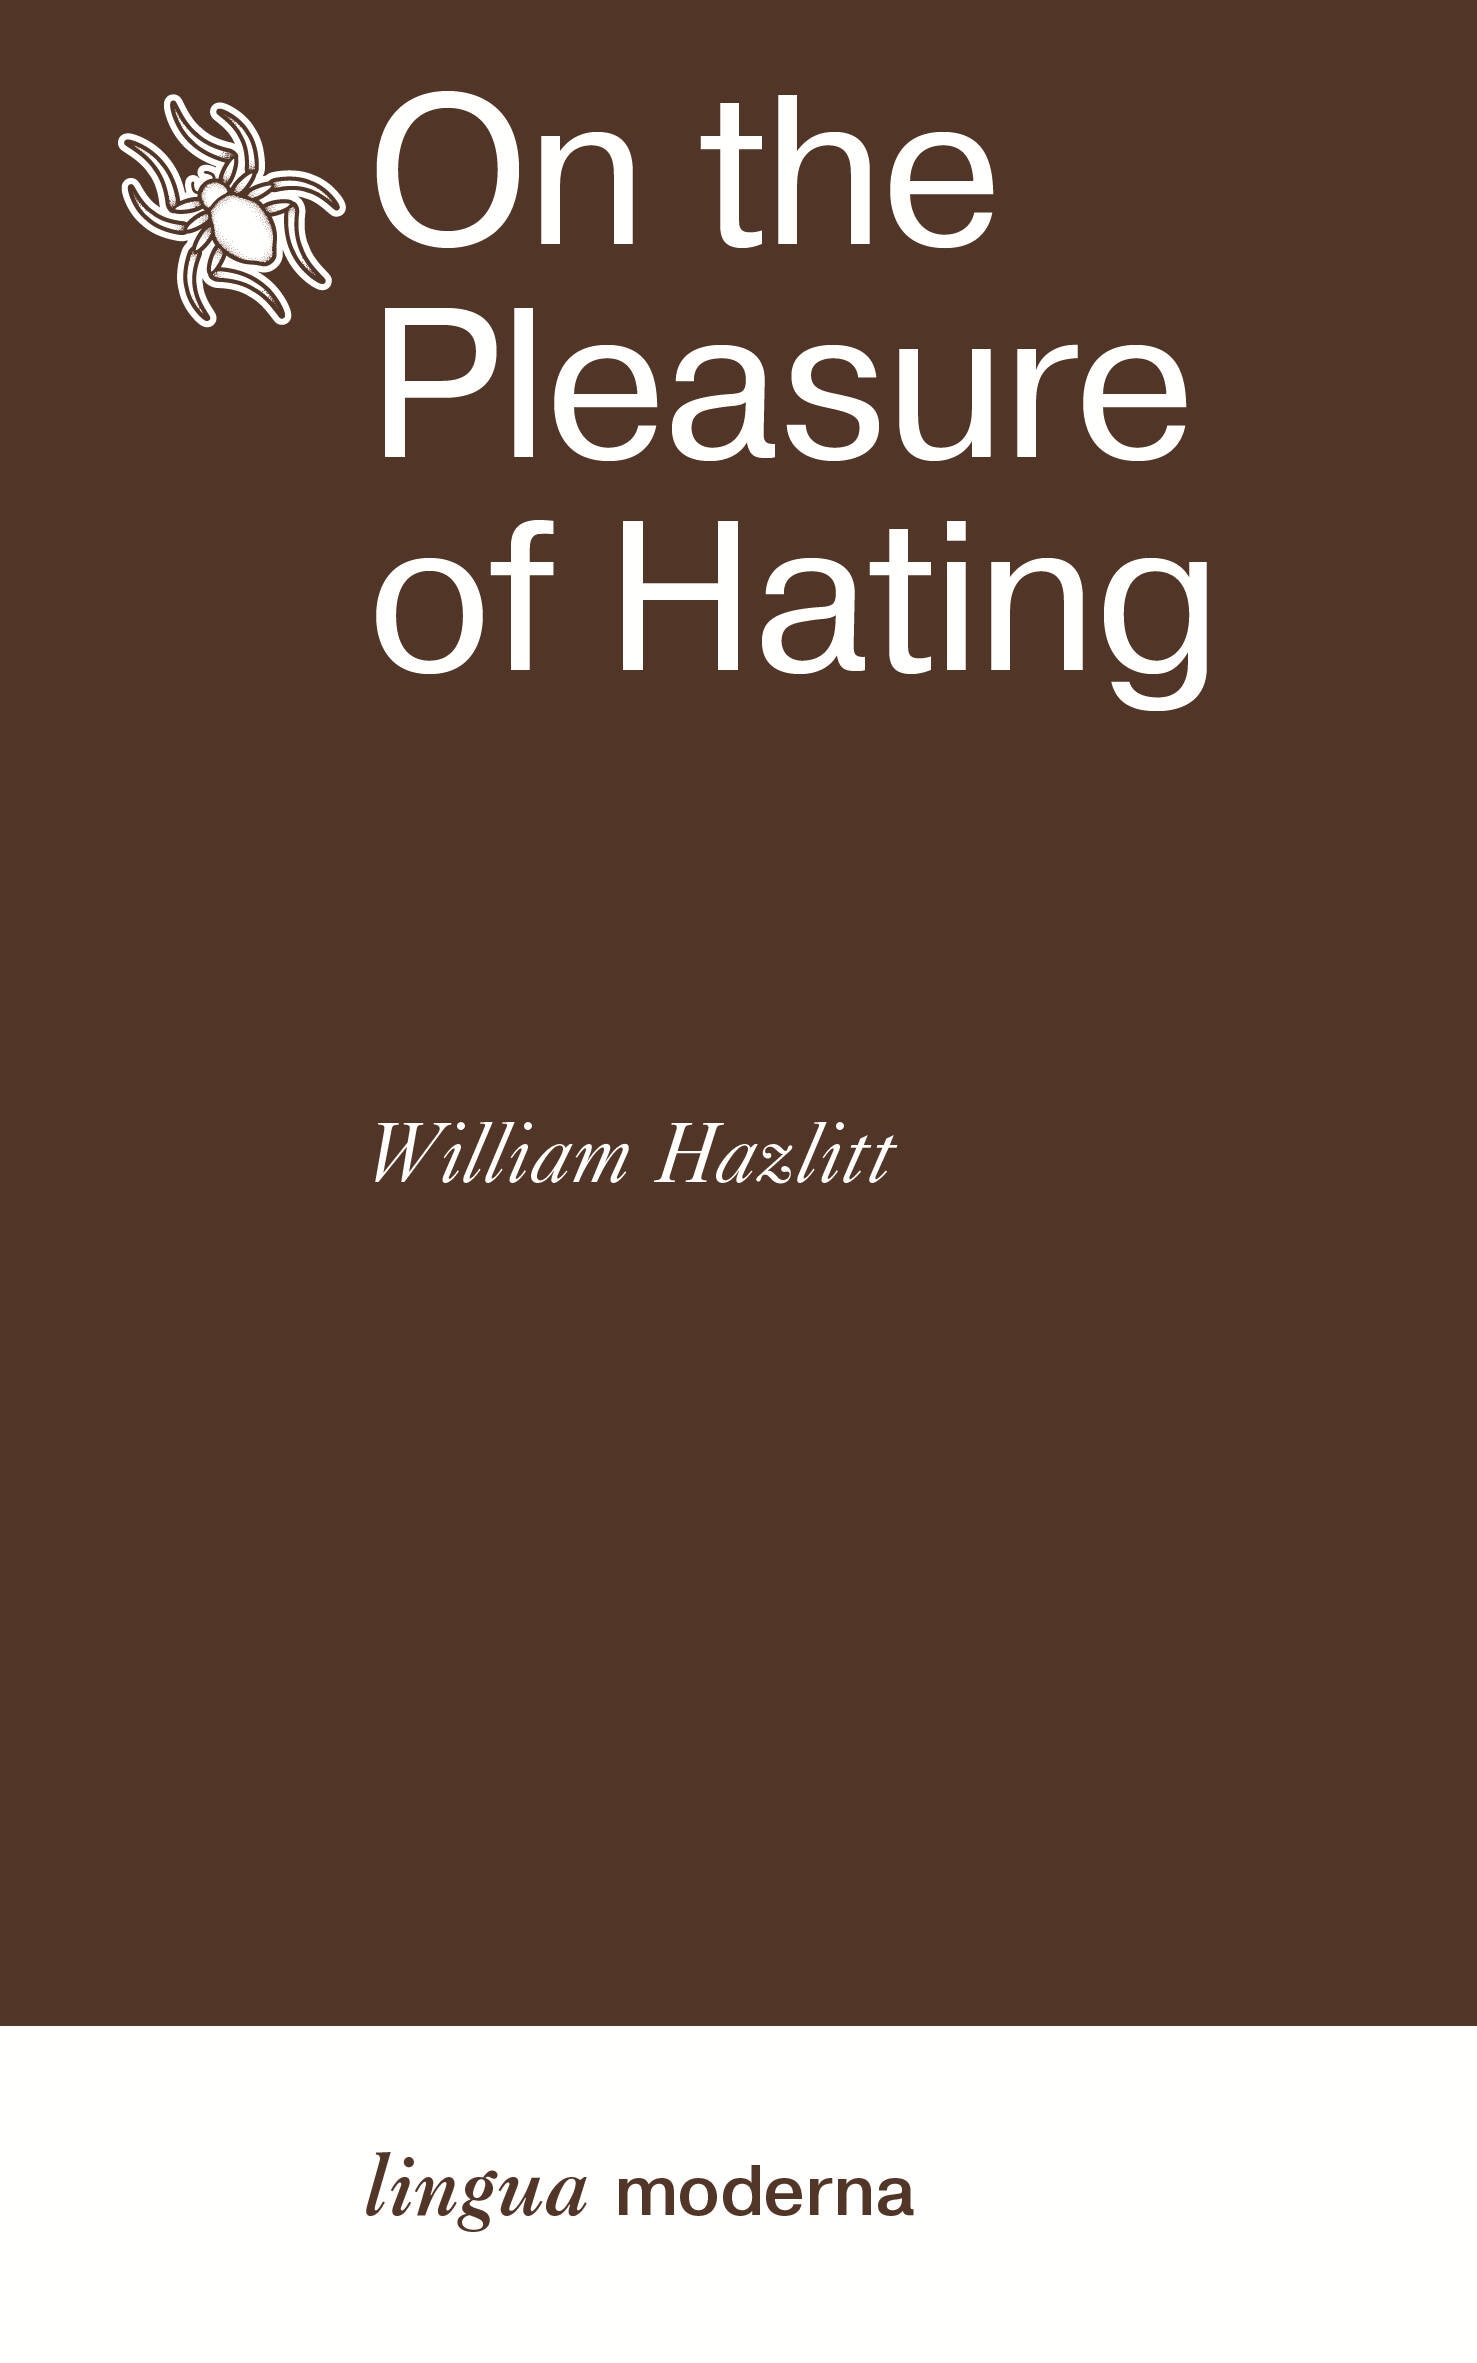 Book “On the Pleasure of Hating” — 2024